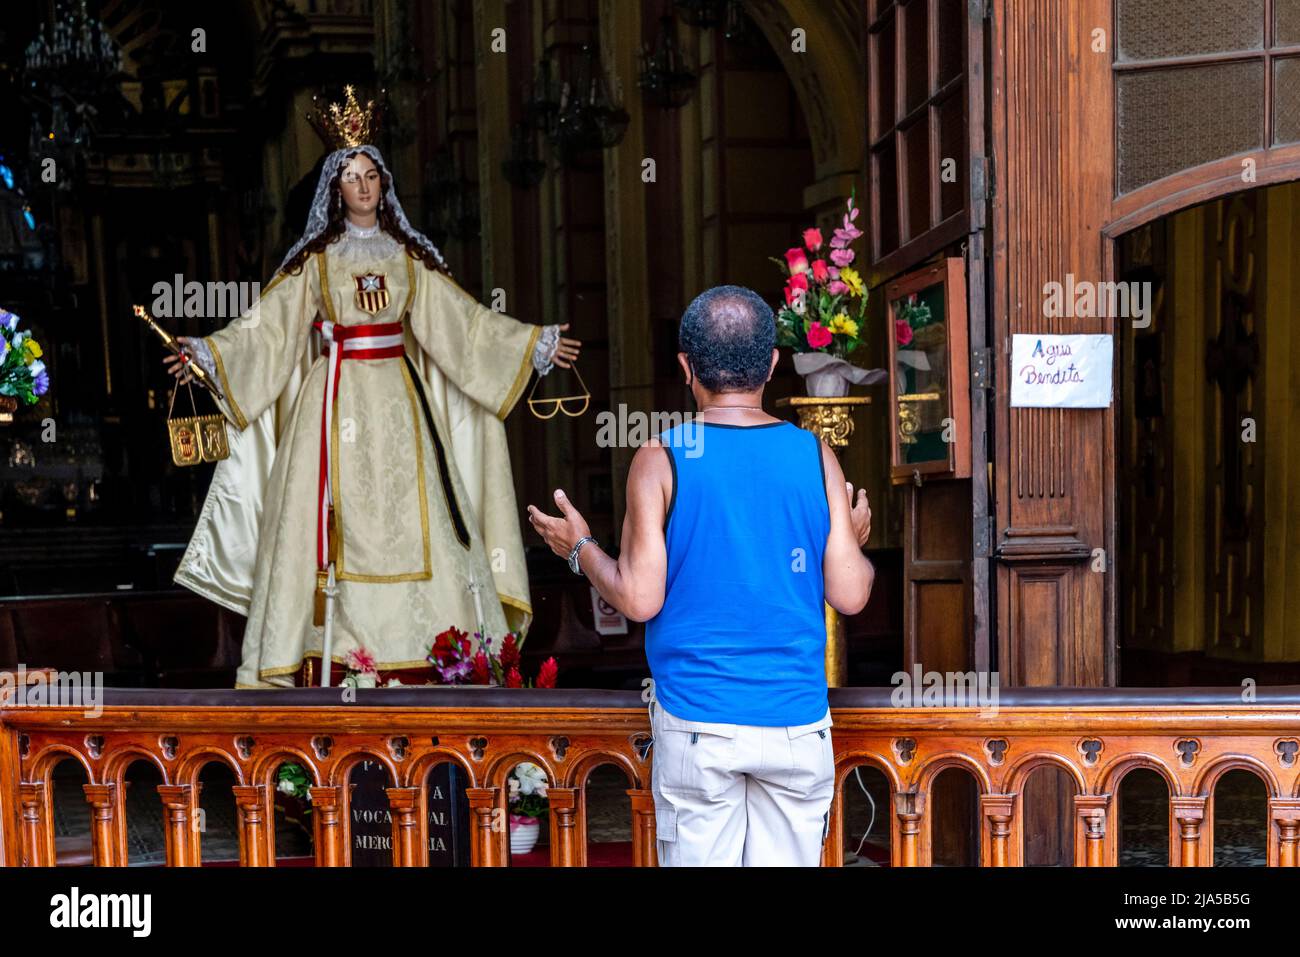 Local People Pass By and Pray To A Statue Of The Virgin Mary At The Minor Basilica and Convent of Nuestra Señora de la Merced, Central Lima, Peru. Stock Photo